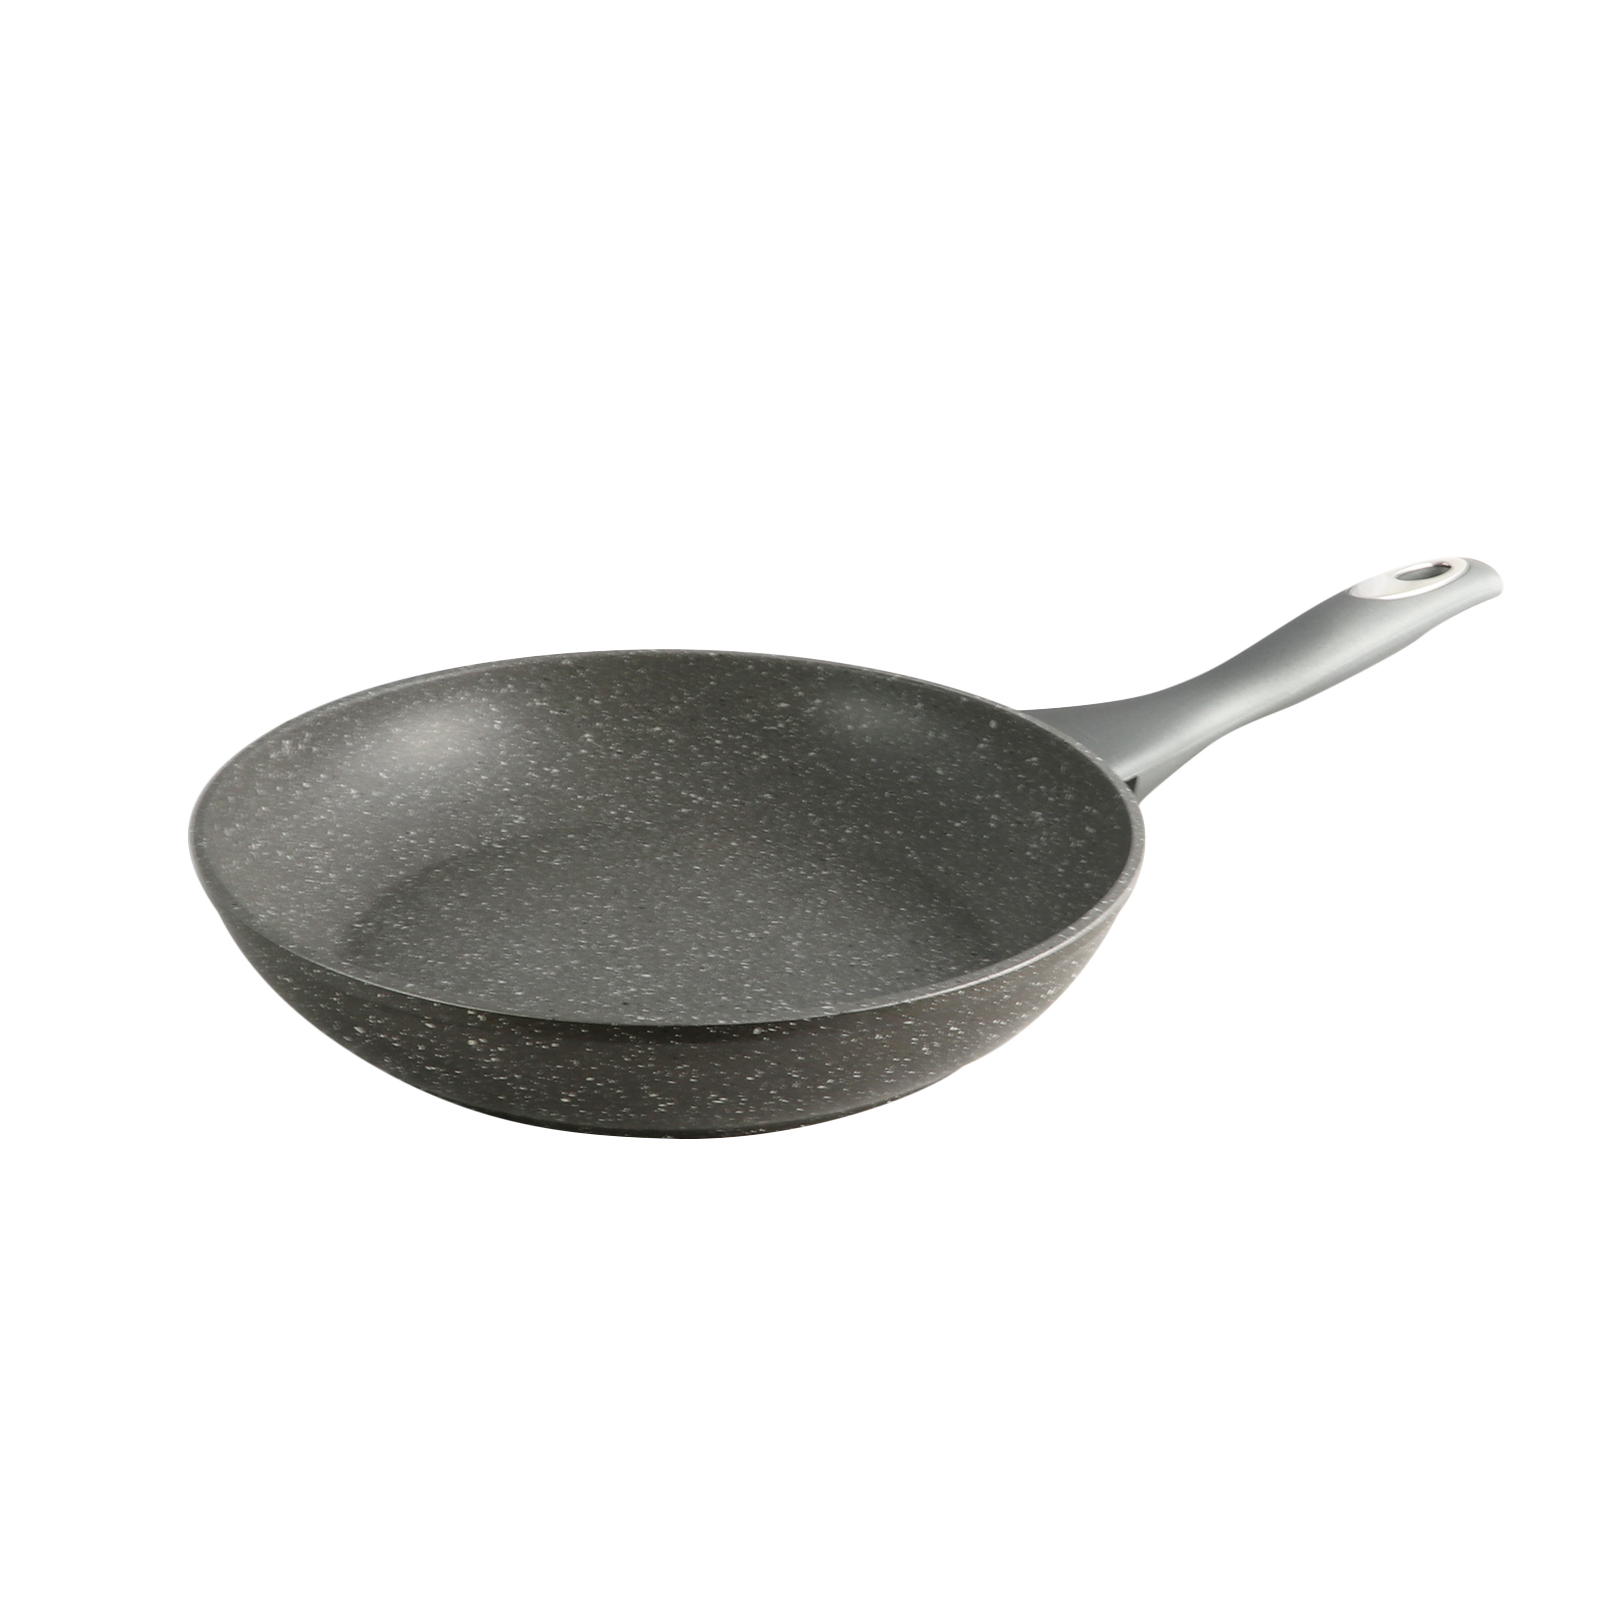 Oster Caswell 9.5 inch Frying Pan in Grey Marble